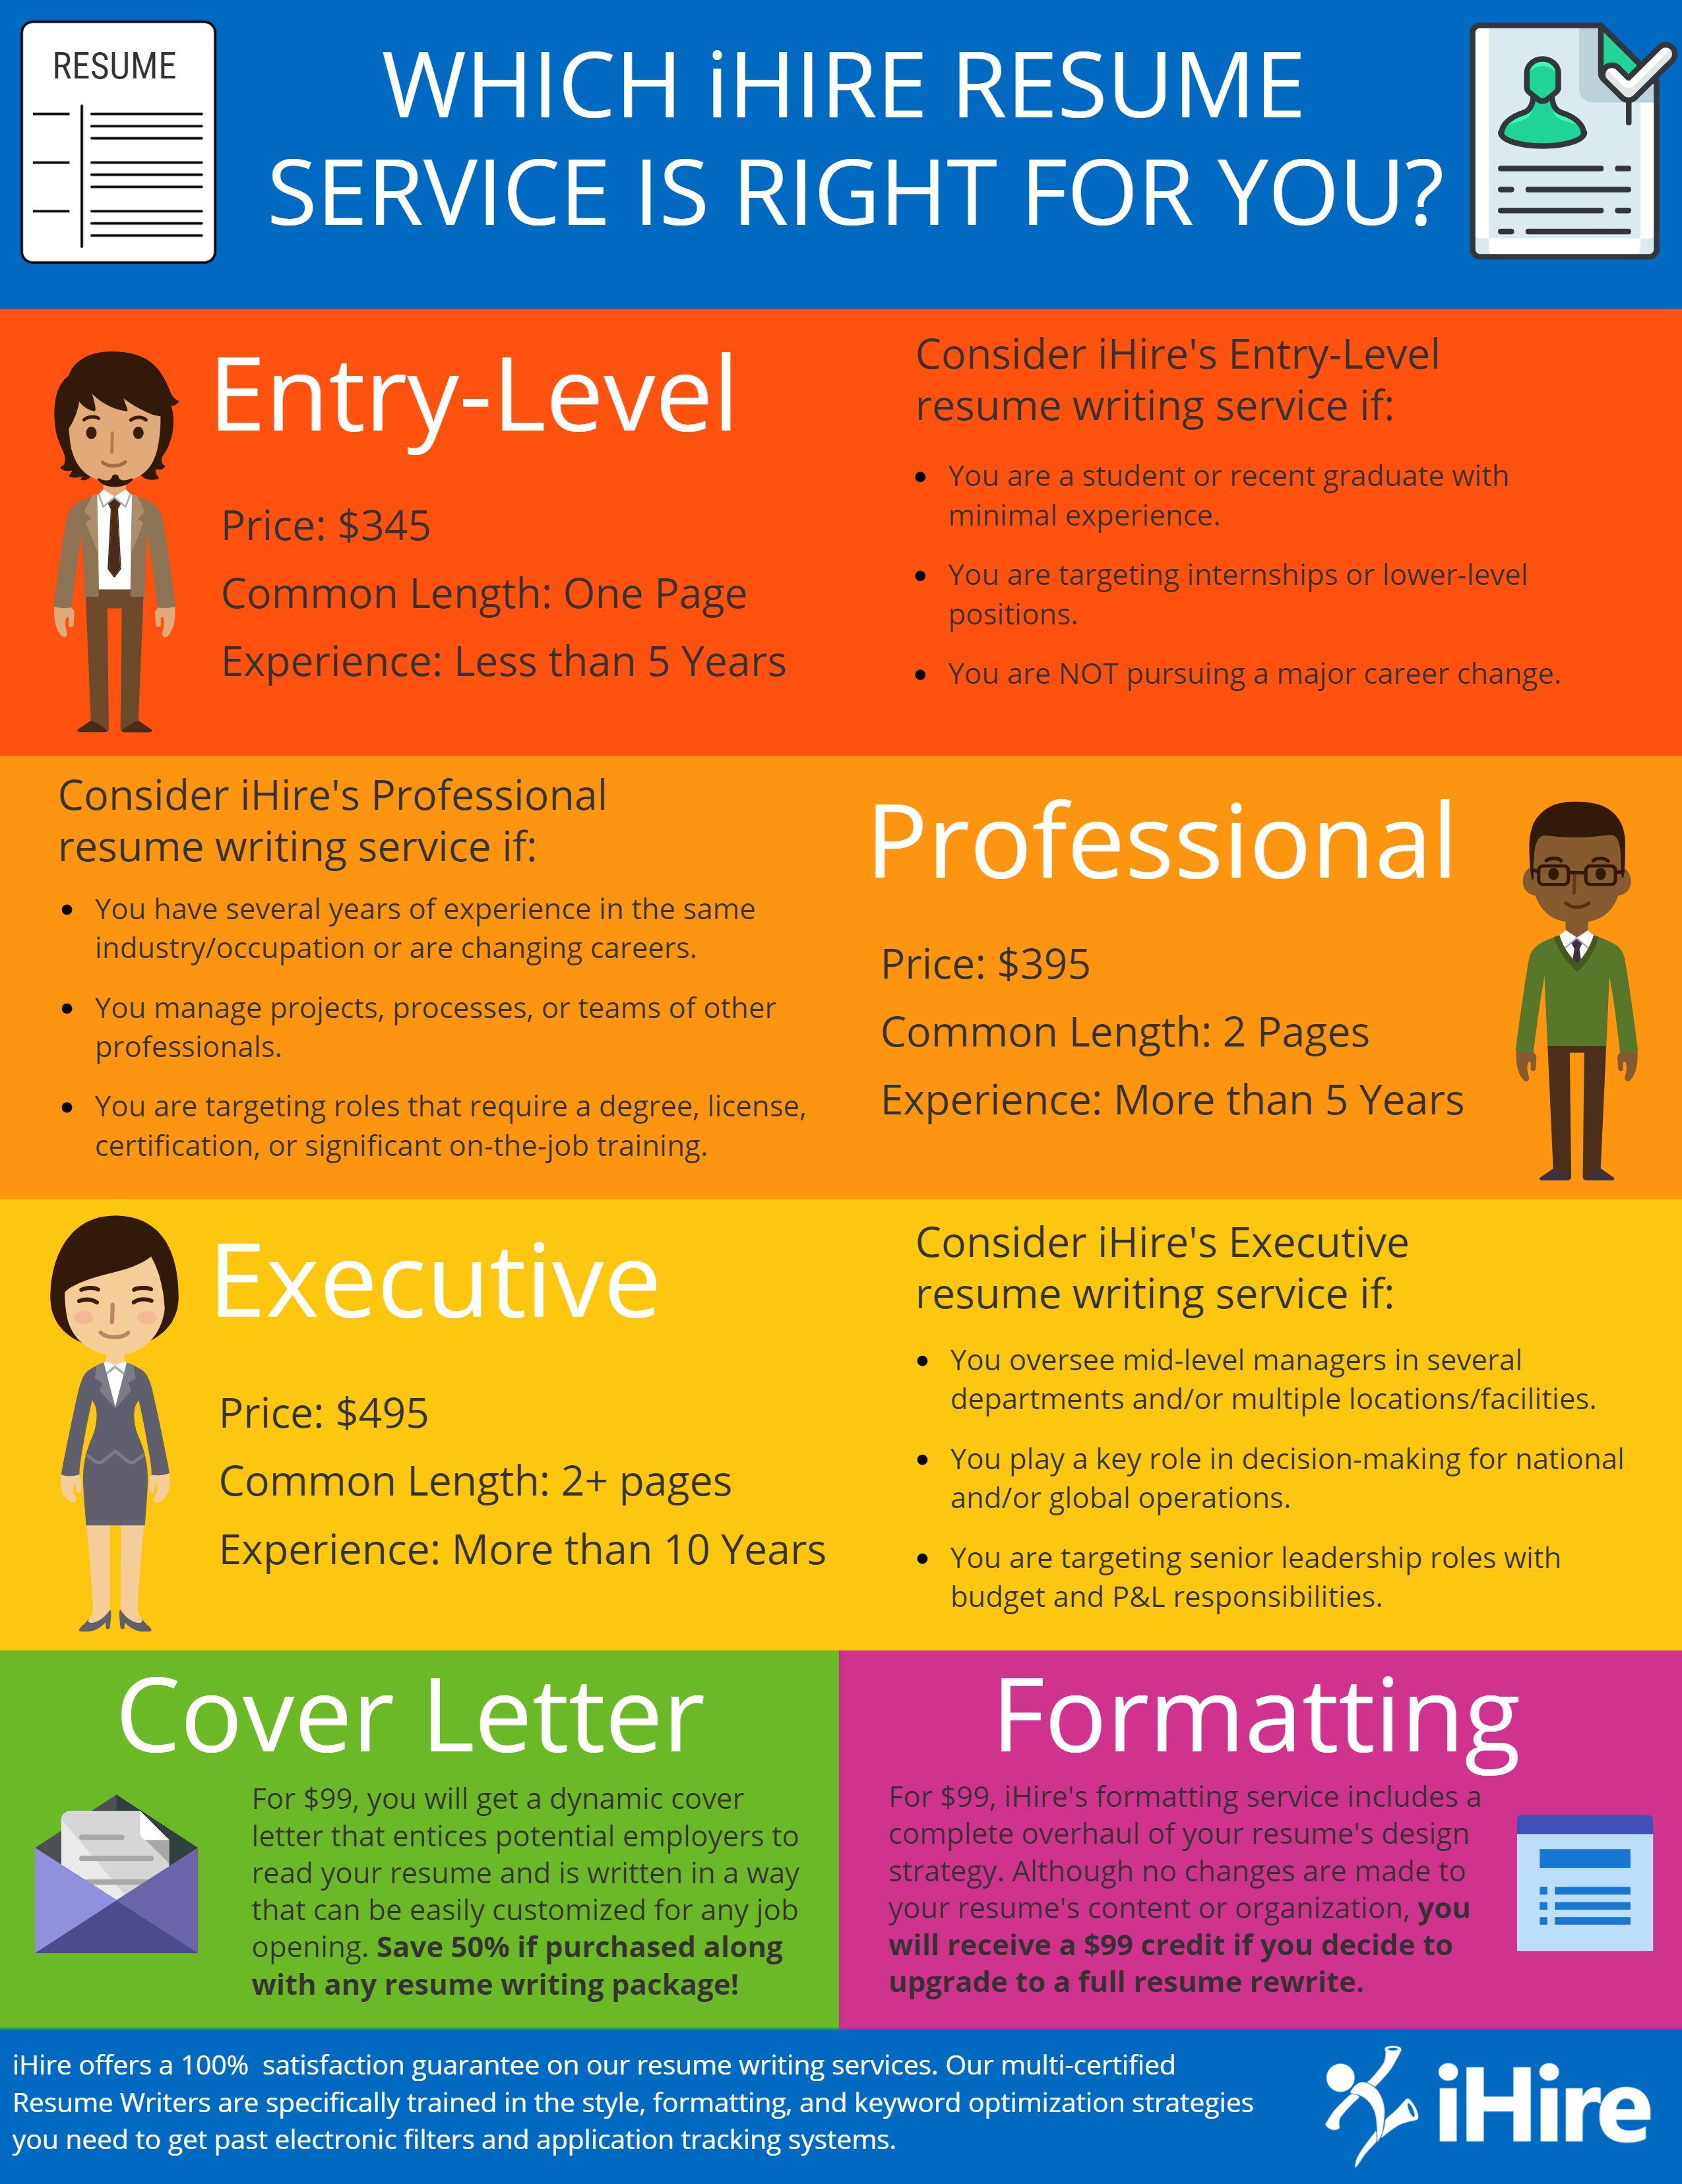 Resume writing service online